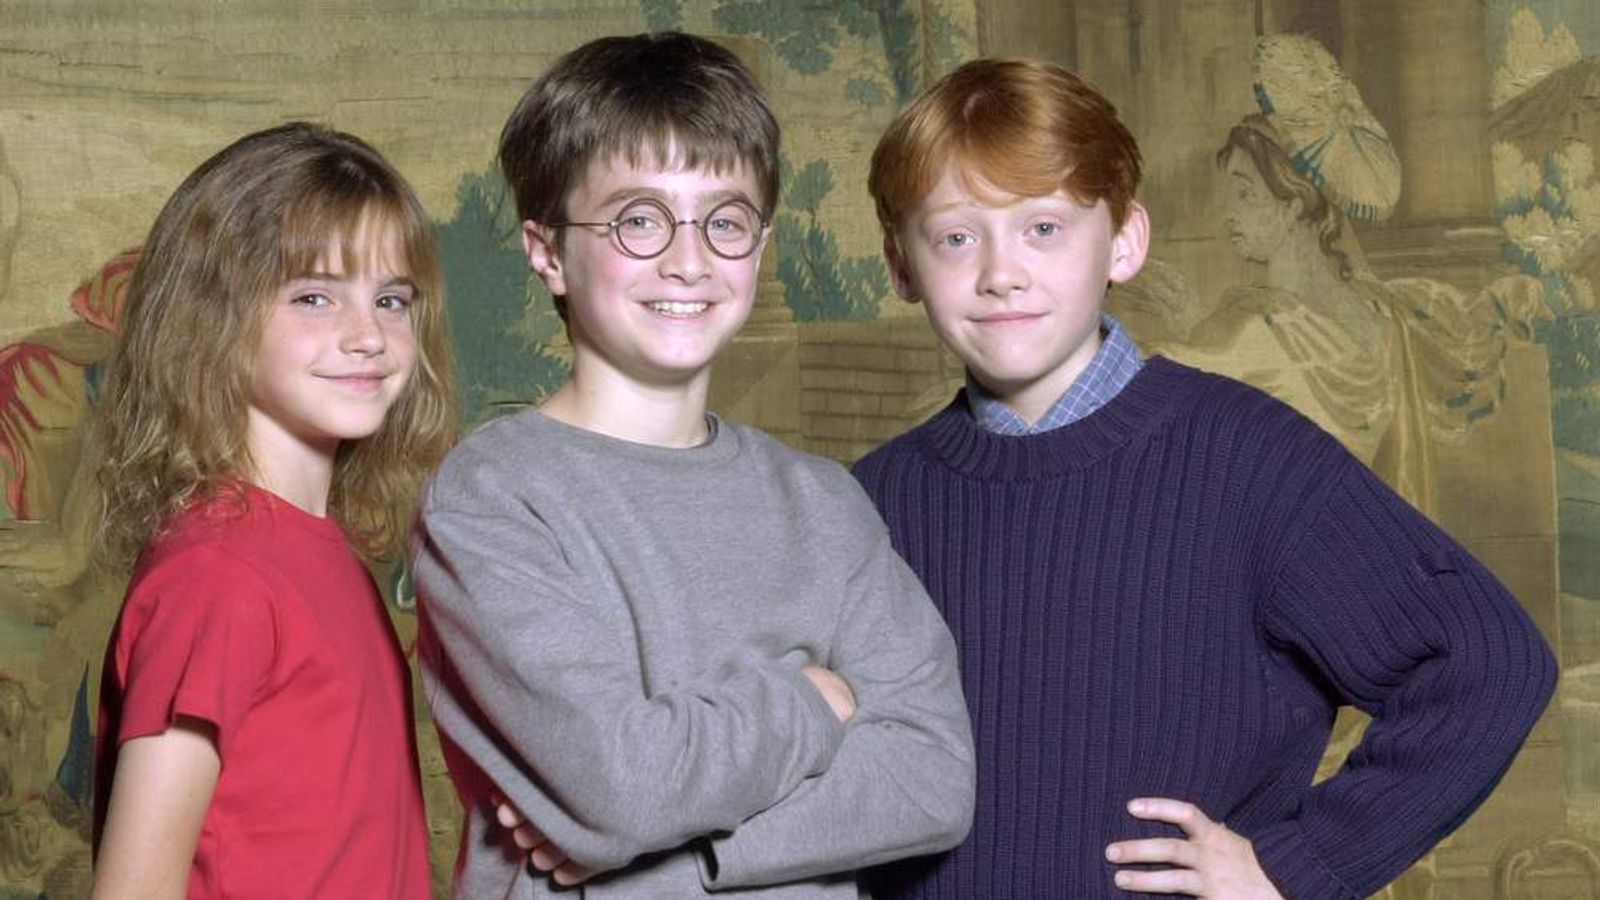 JK Rowling Describes Harry Potter In His 30s, Ents & Arts News